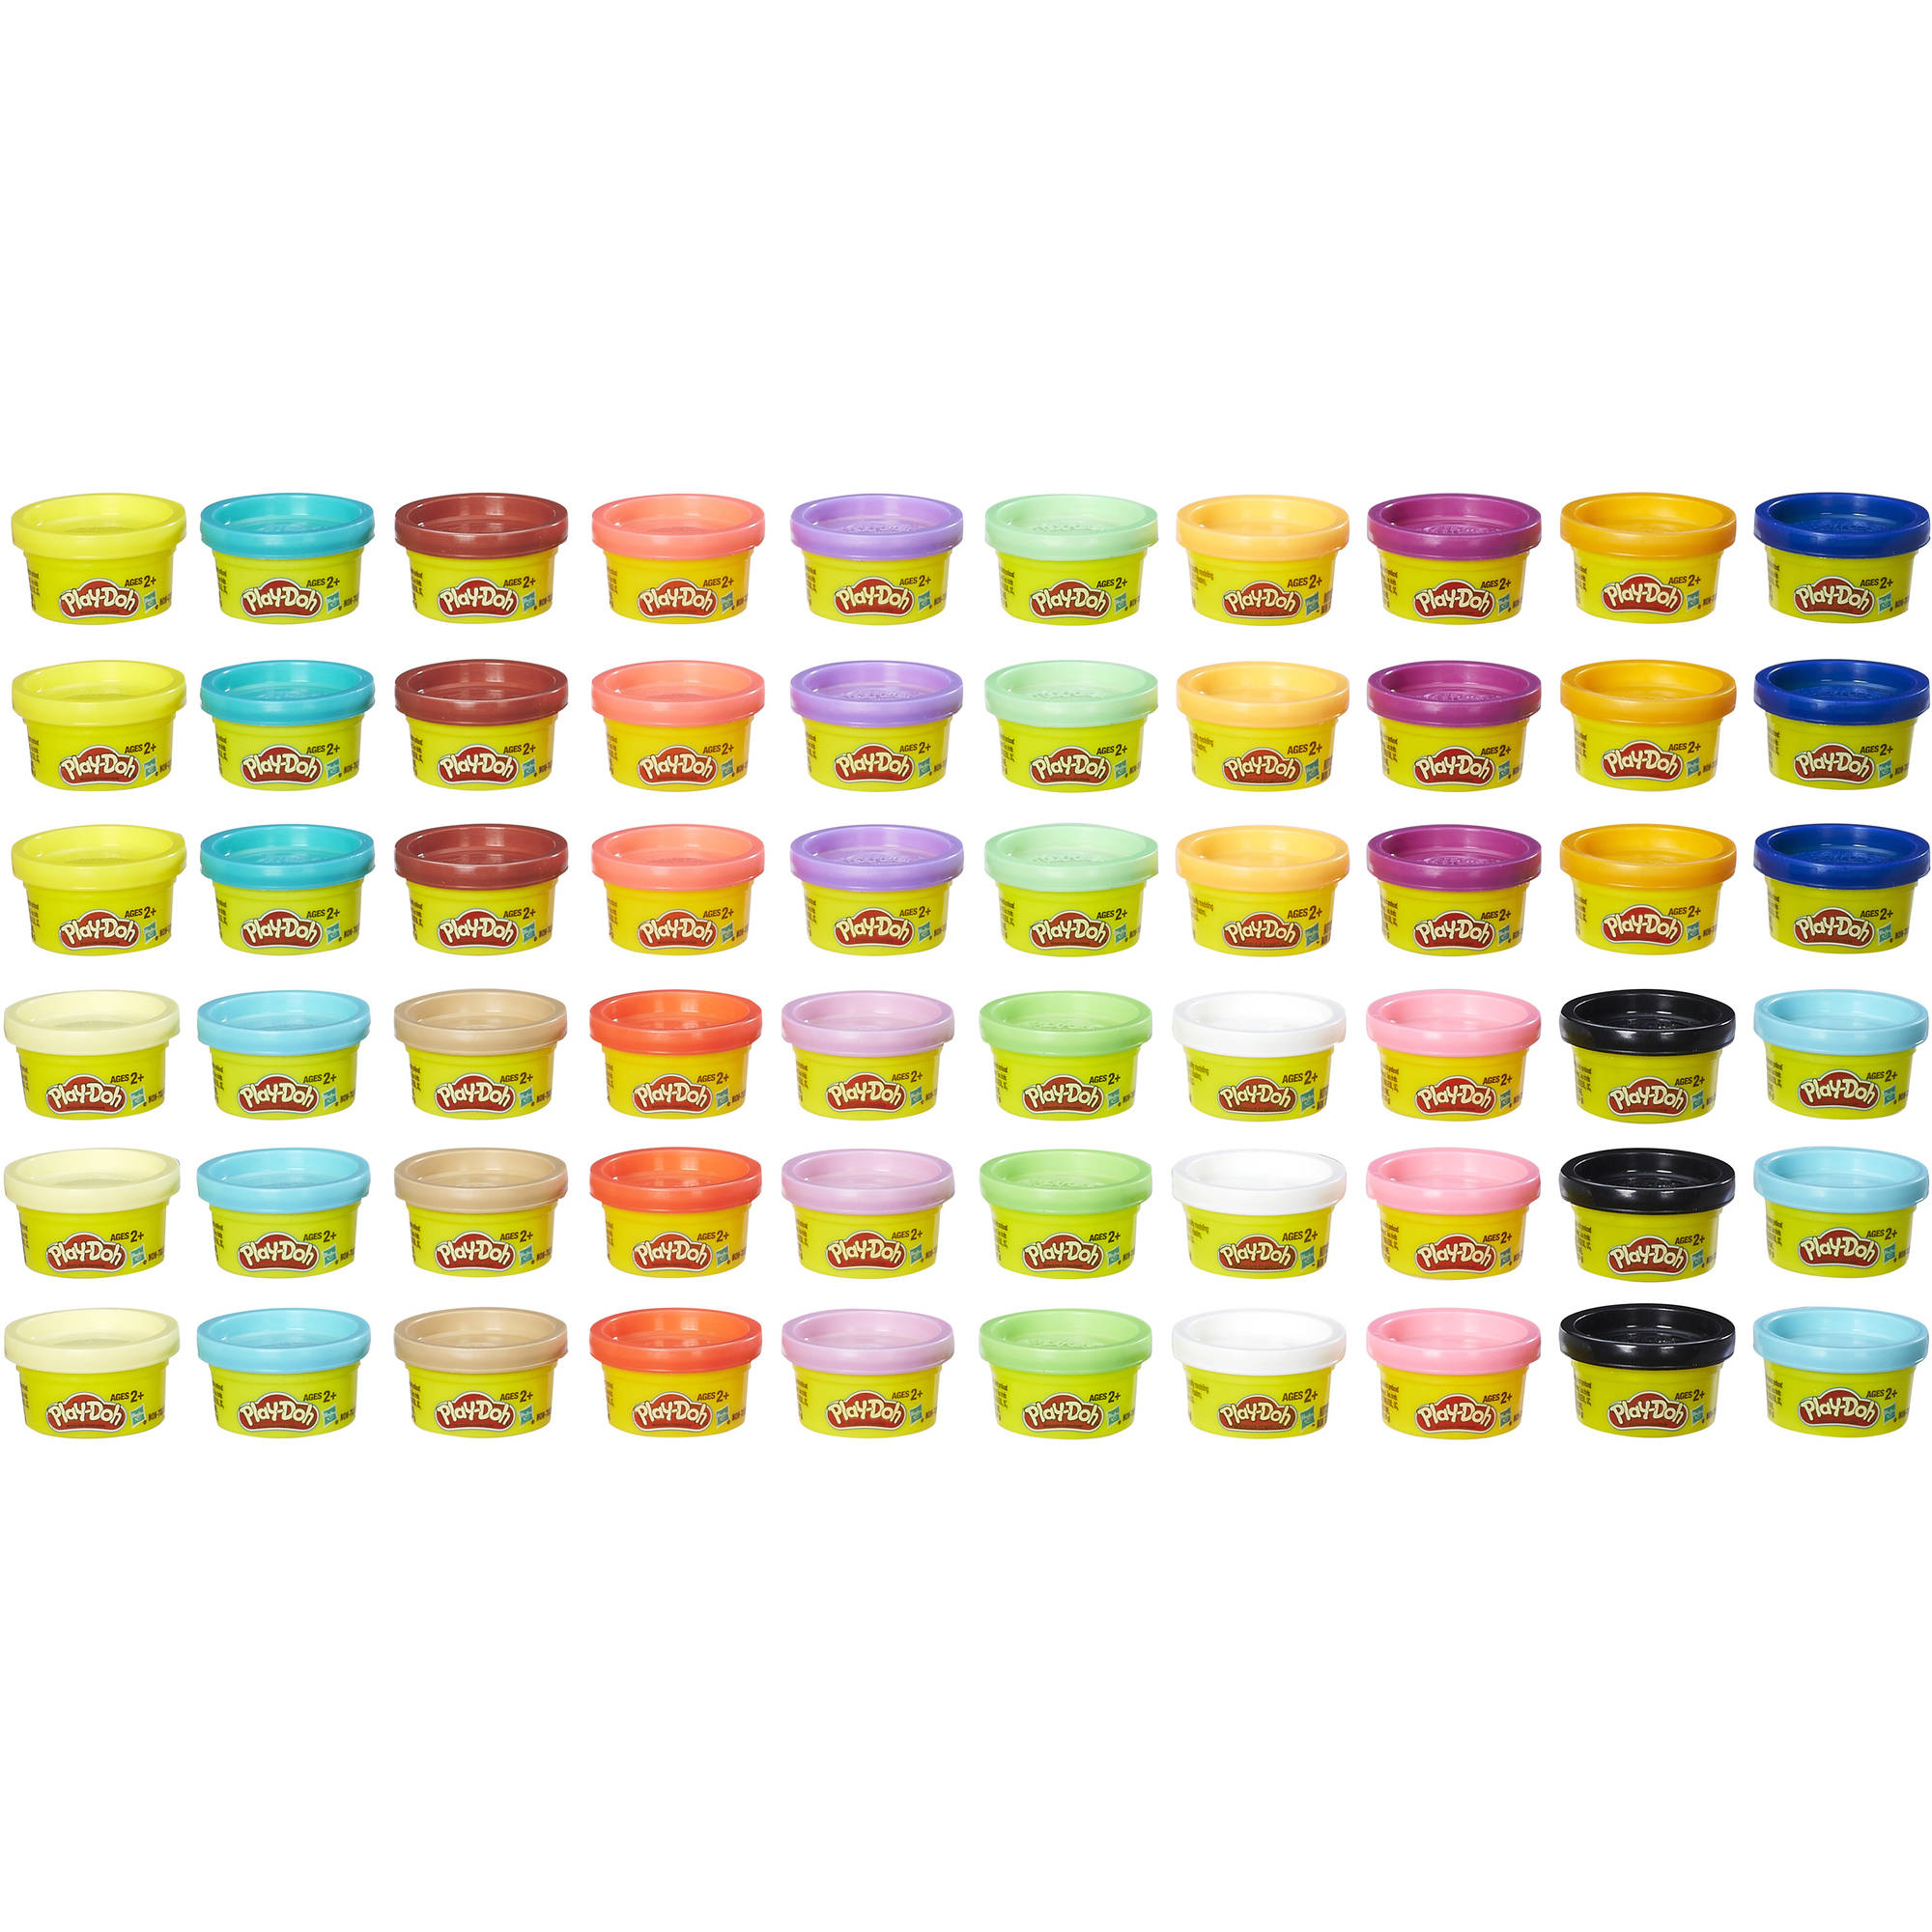 Play-Doh 60th Anniversary 60 Pack, 60 oz (MultiColor) - image 2 of 2